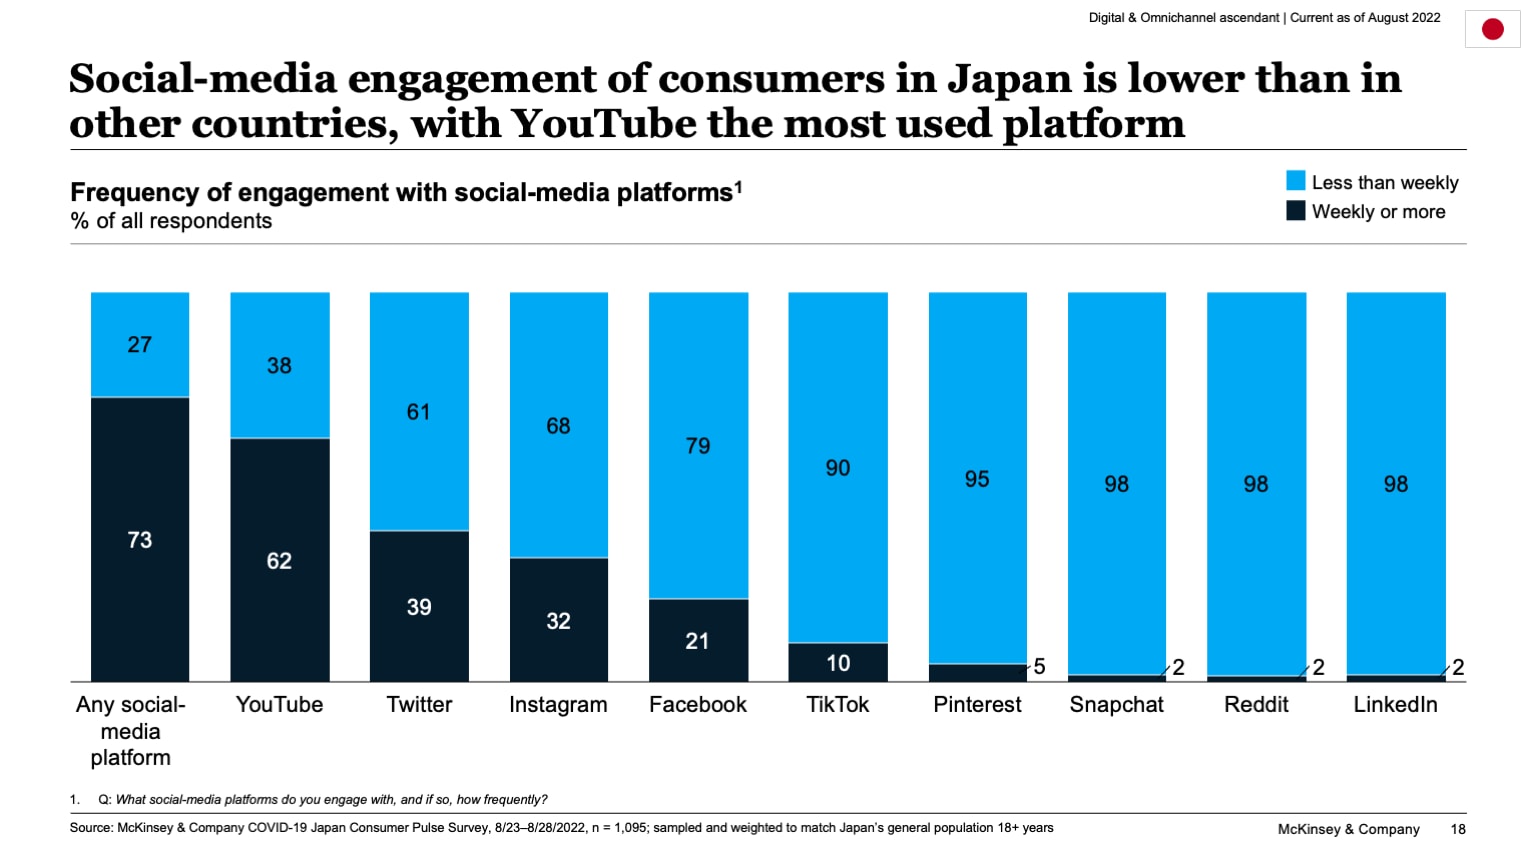 Social-media engagement of consumers in Japan is lower than in other countries, with YouTube the most used platform